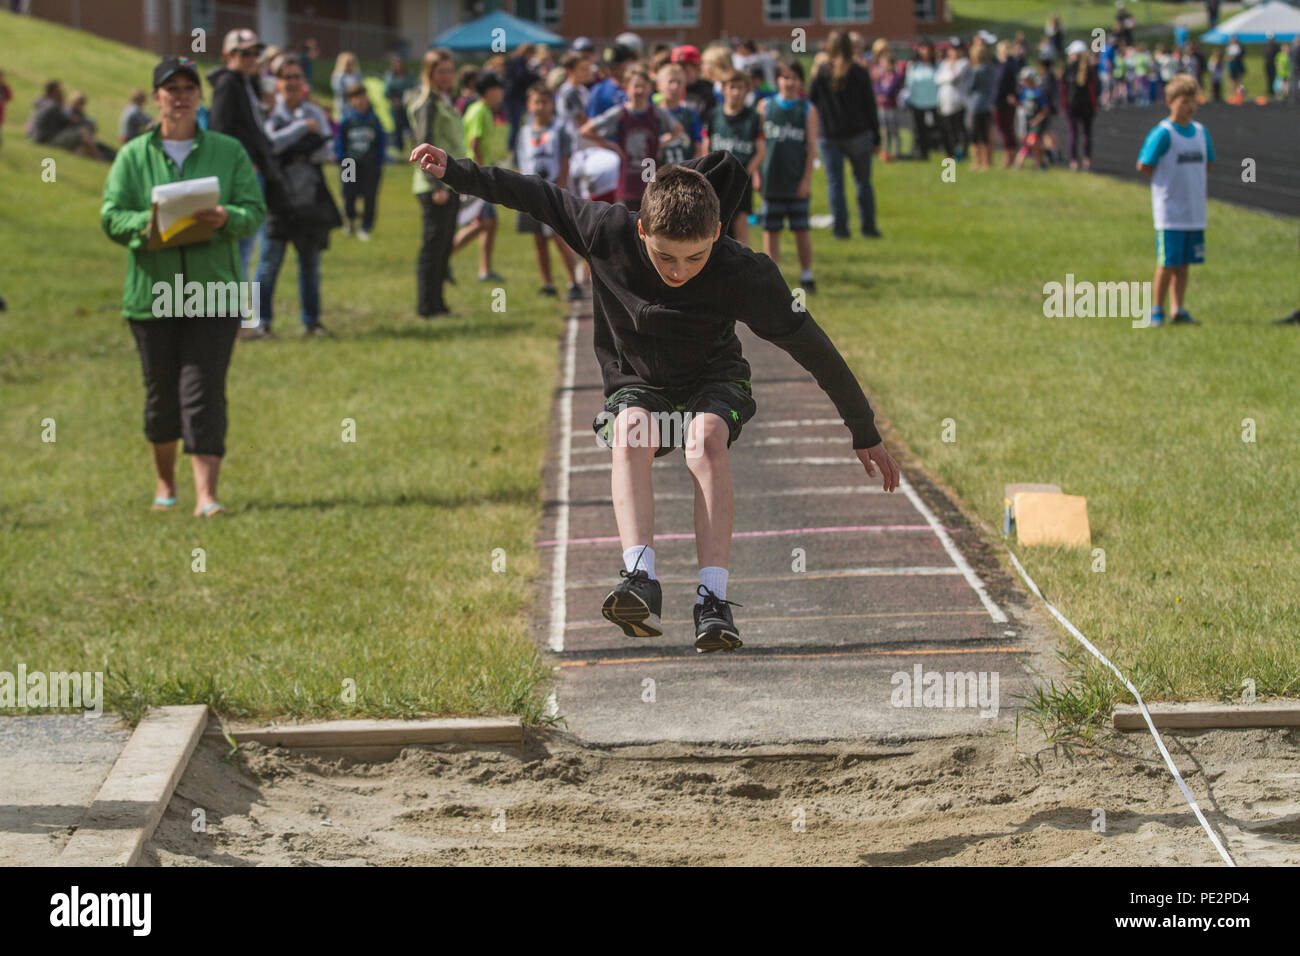 Young boy competing in track & field's  trple jump, wearing hoodie and shorts. Caught in mid air. Model released Stock Photo